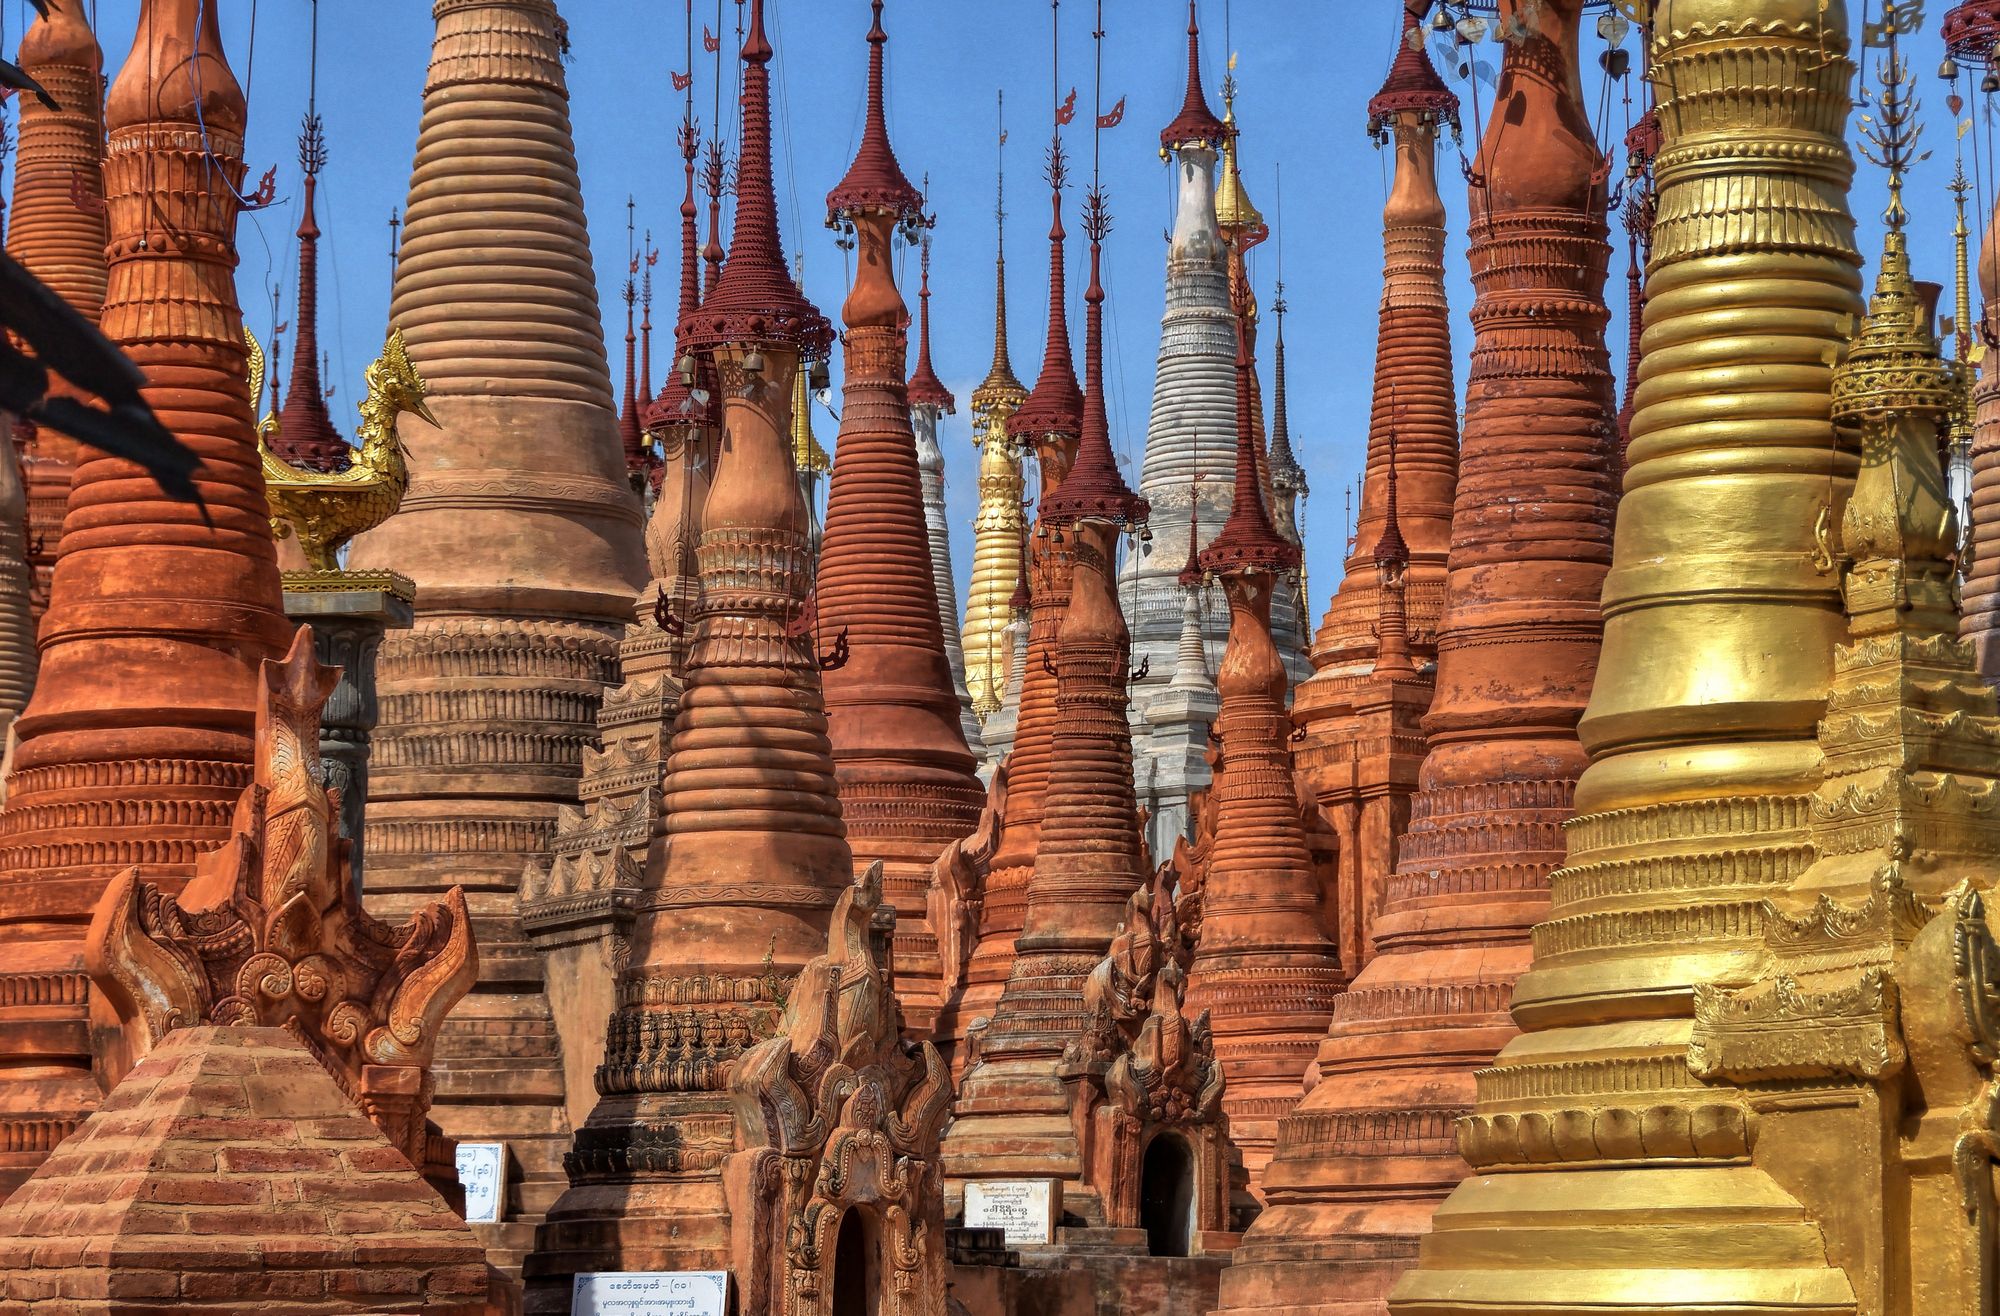 Cryptocurrencies in Myanmar: A Risky Affair With No Immediate Potential Going Forward